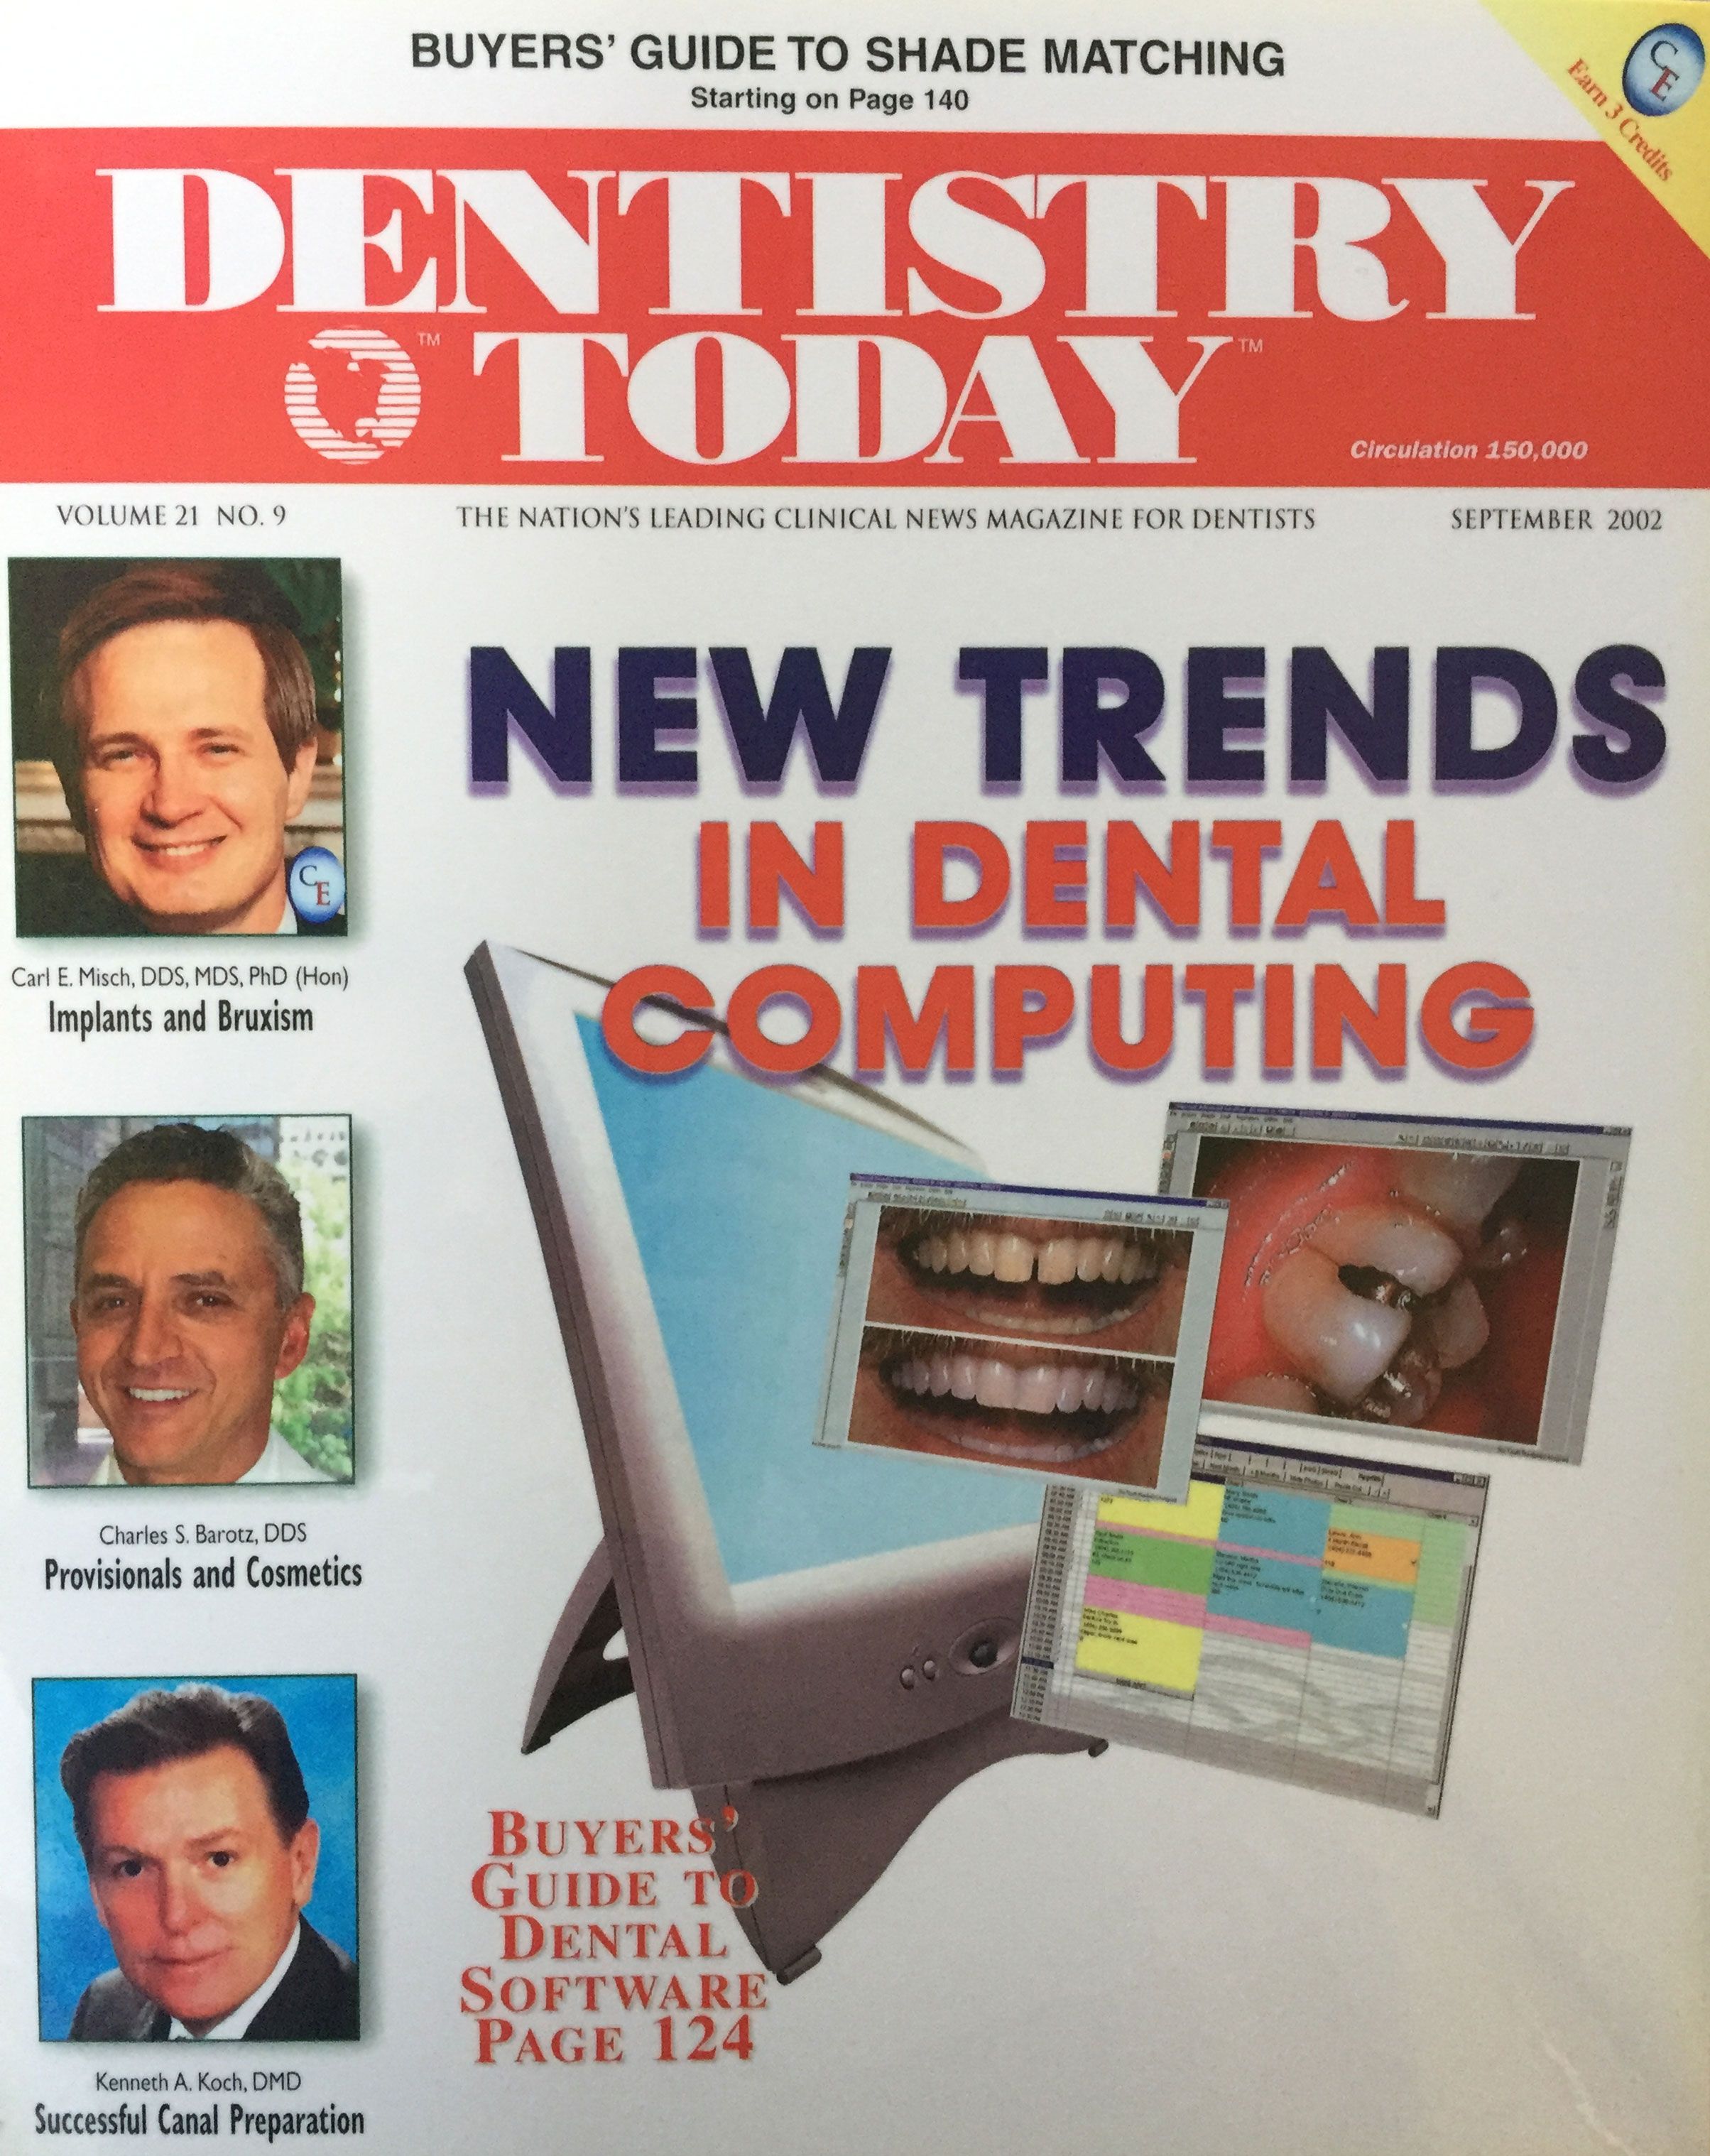 Dr. Barotz on Dentistry Today